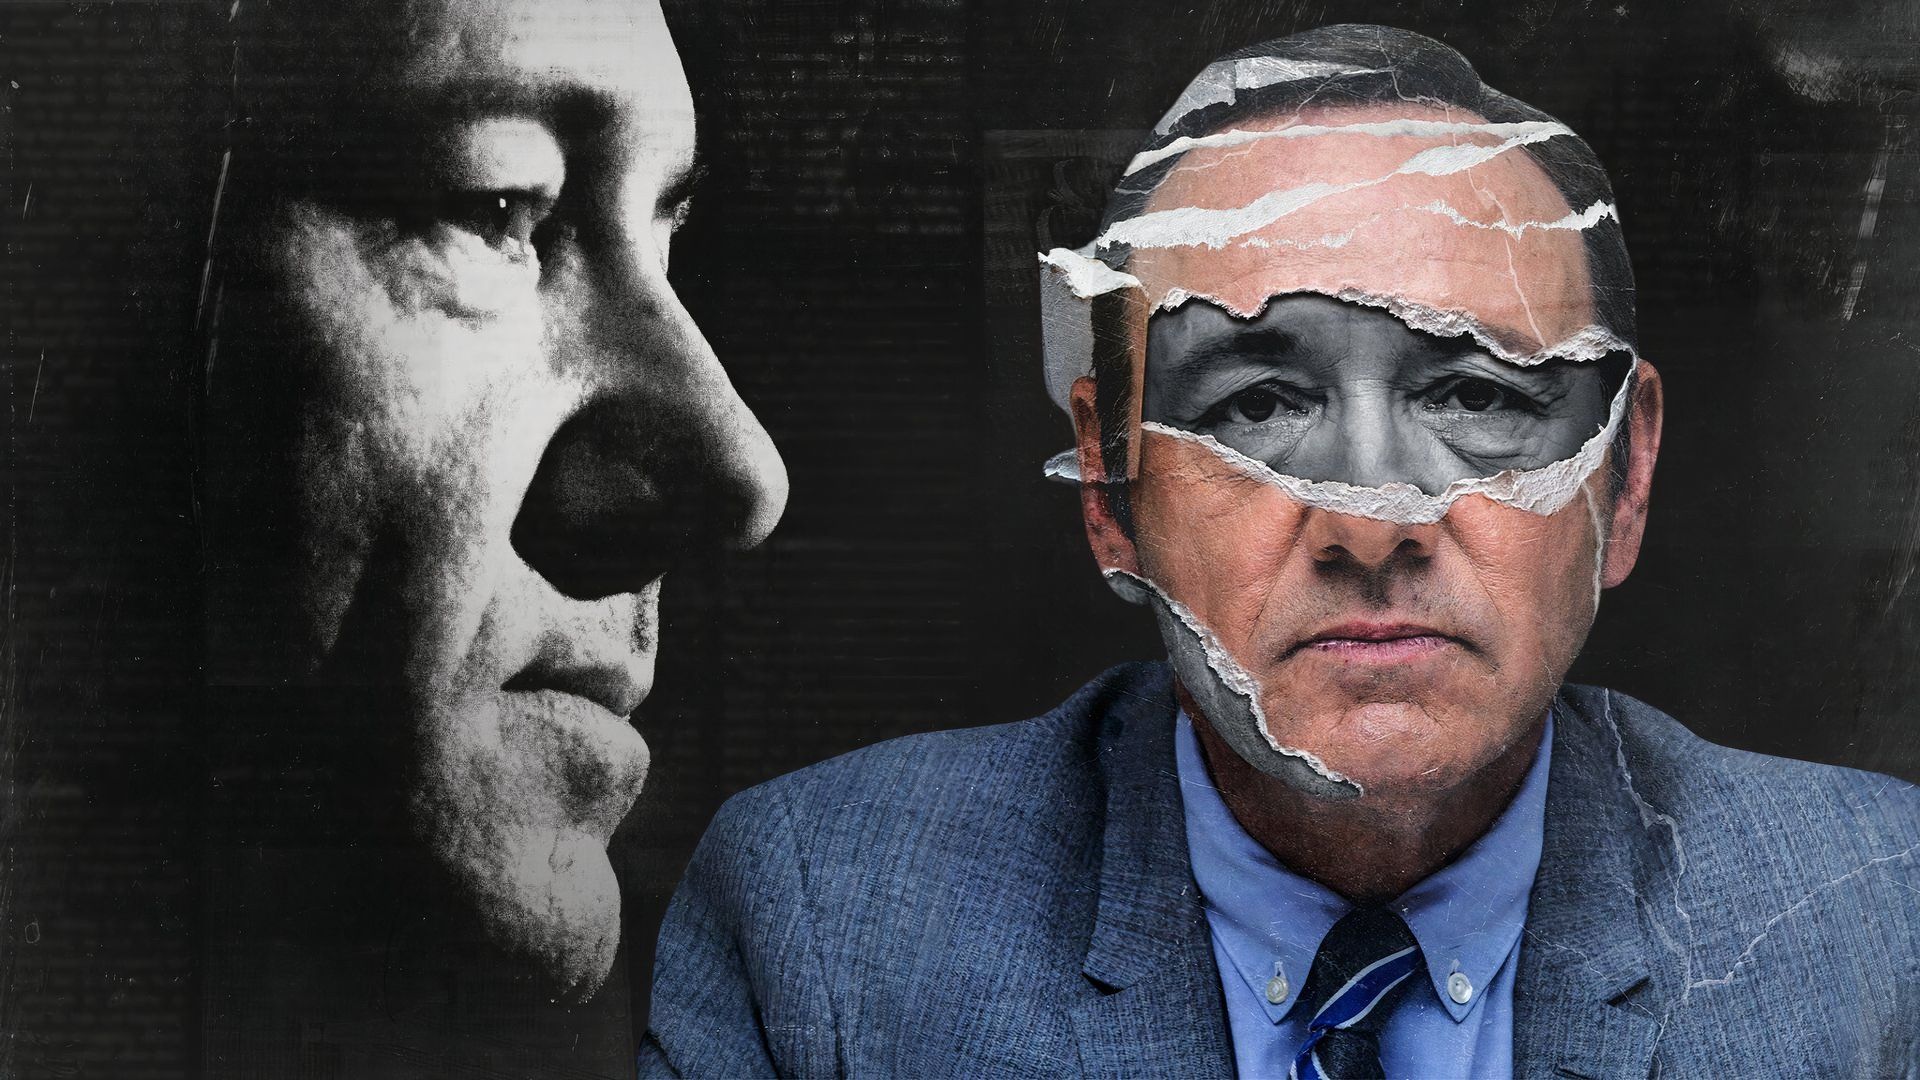 An edit of Kevin Spacey wearing a suit jacket and tie in Spacey Unmasked